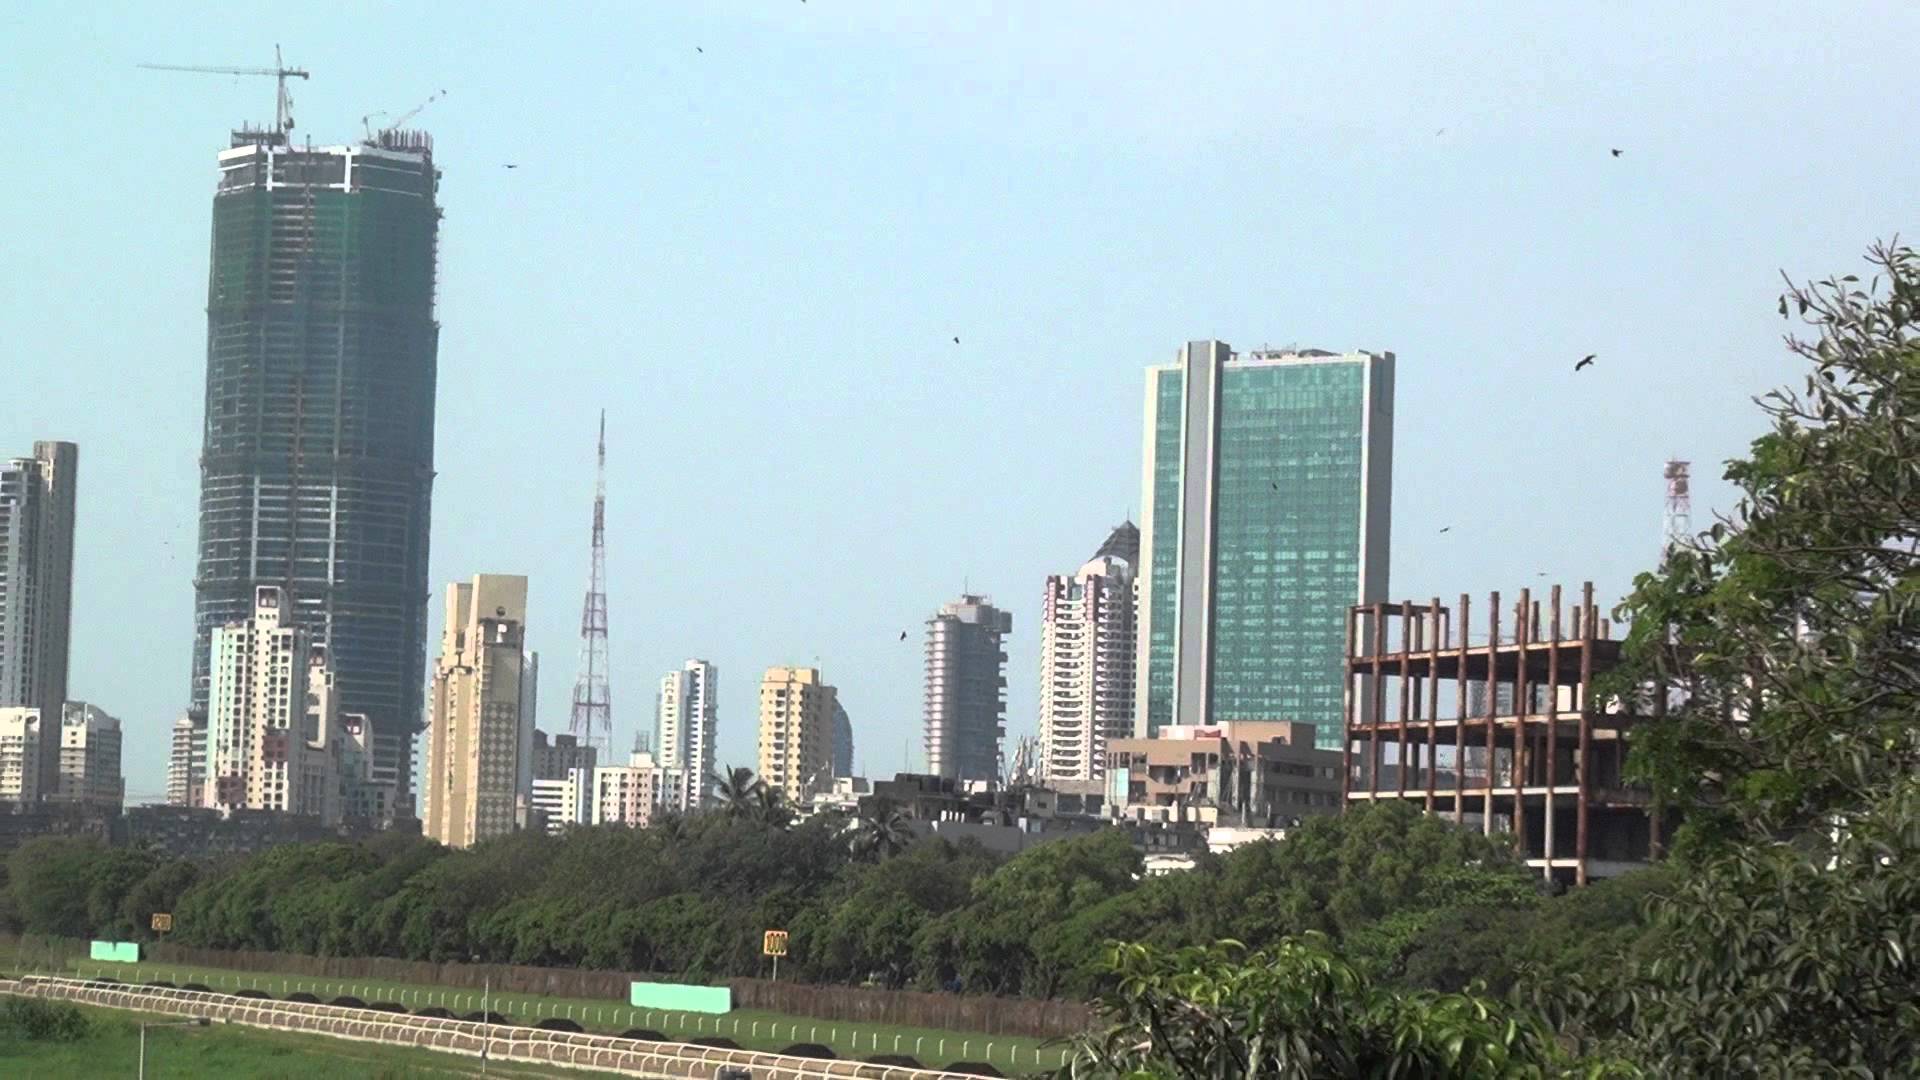 PALAIS ROYALE - TALLEST TOWER IN INDIA UNDER CONSTRUCTION ...